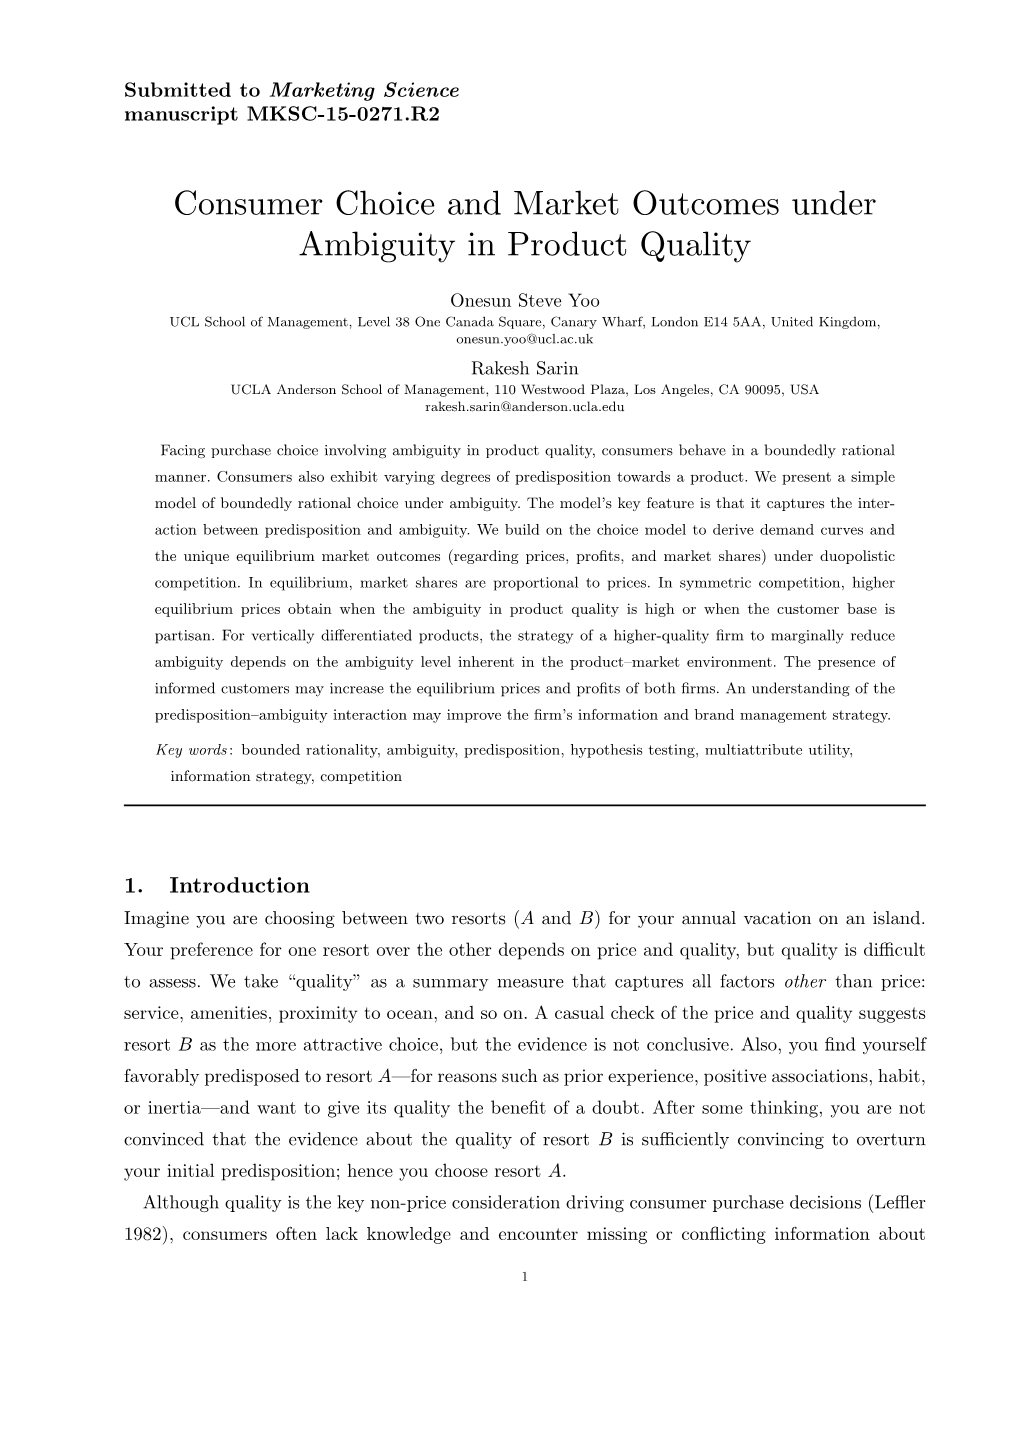 Consumer Choice and Market Outcomes Under Ambiguity in Product Quality